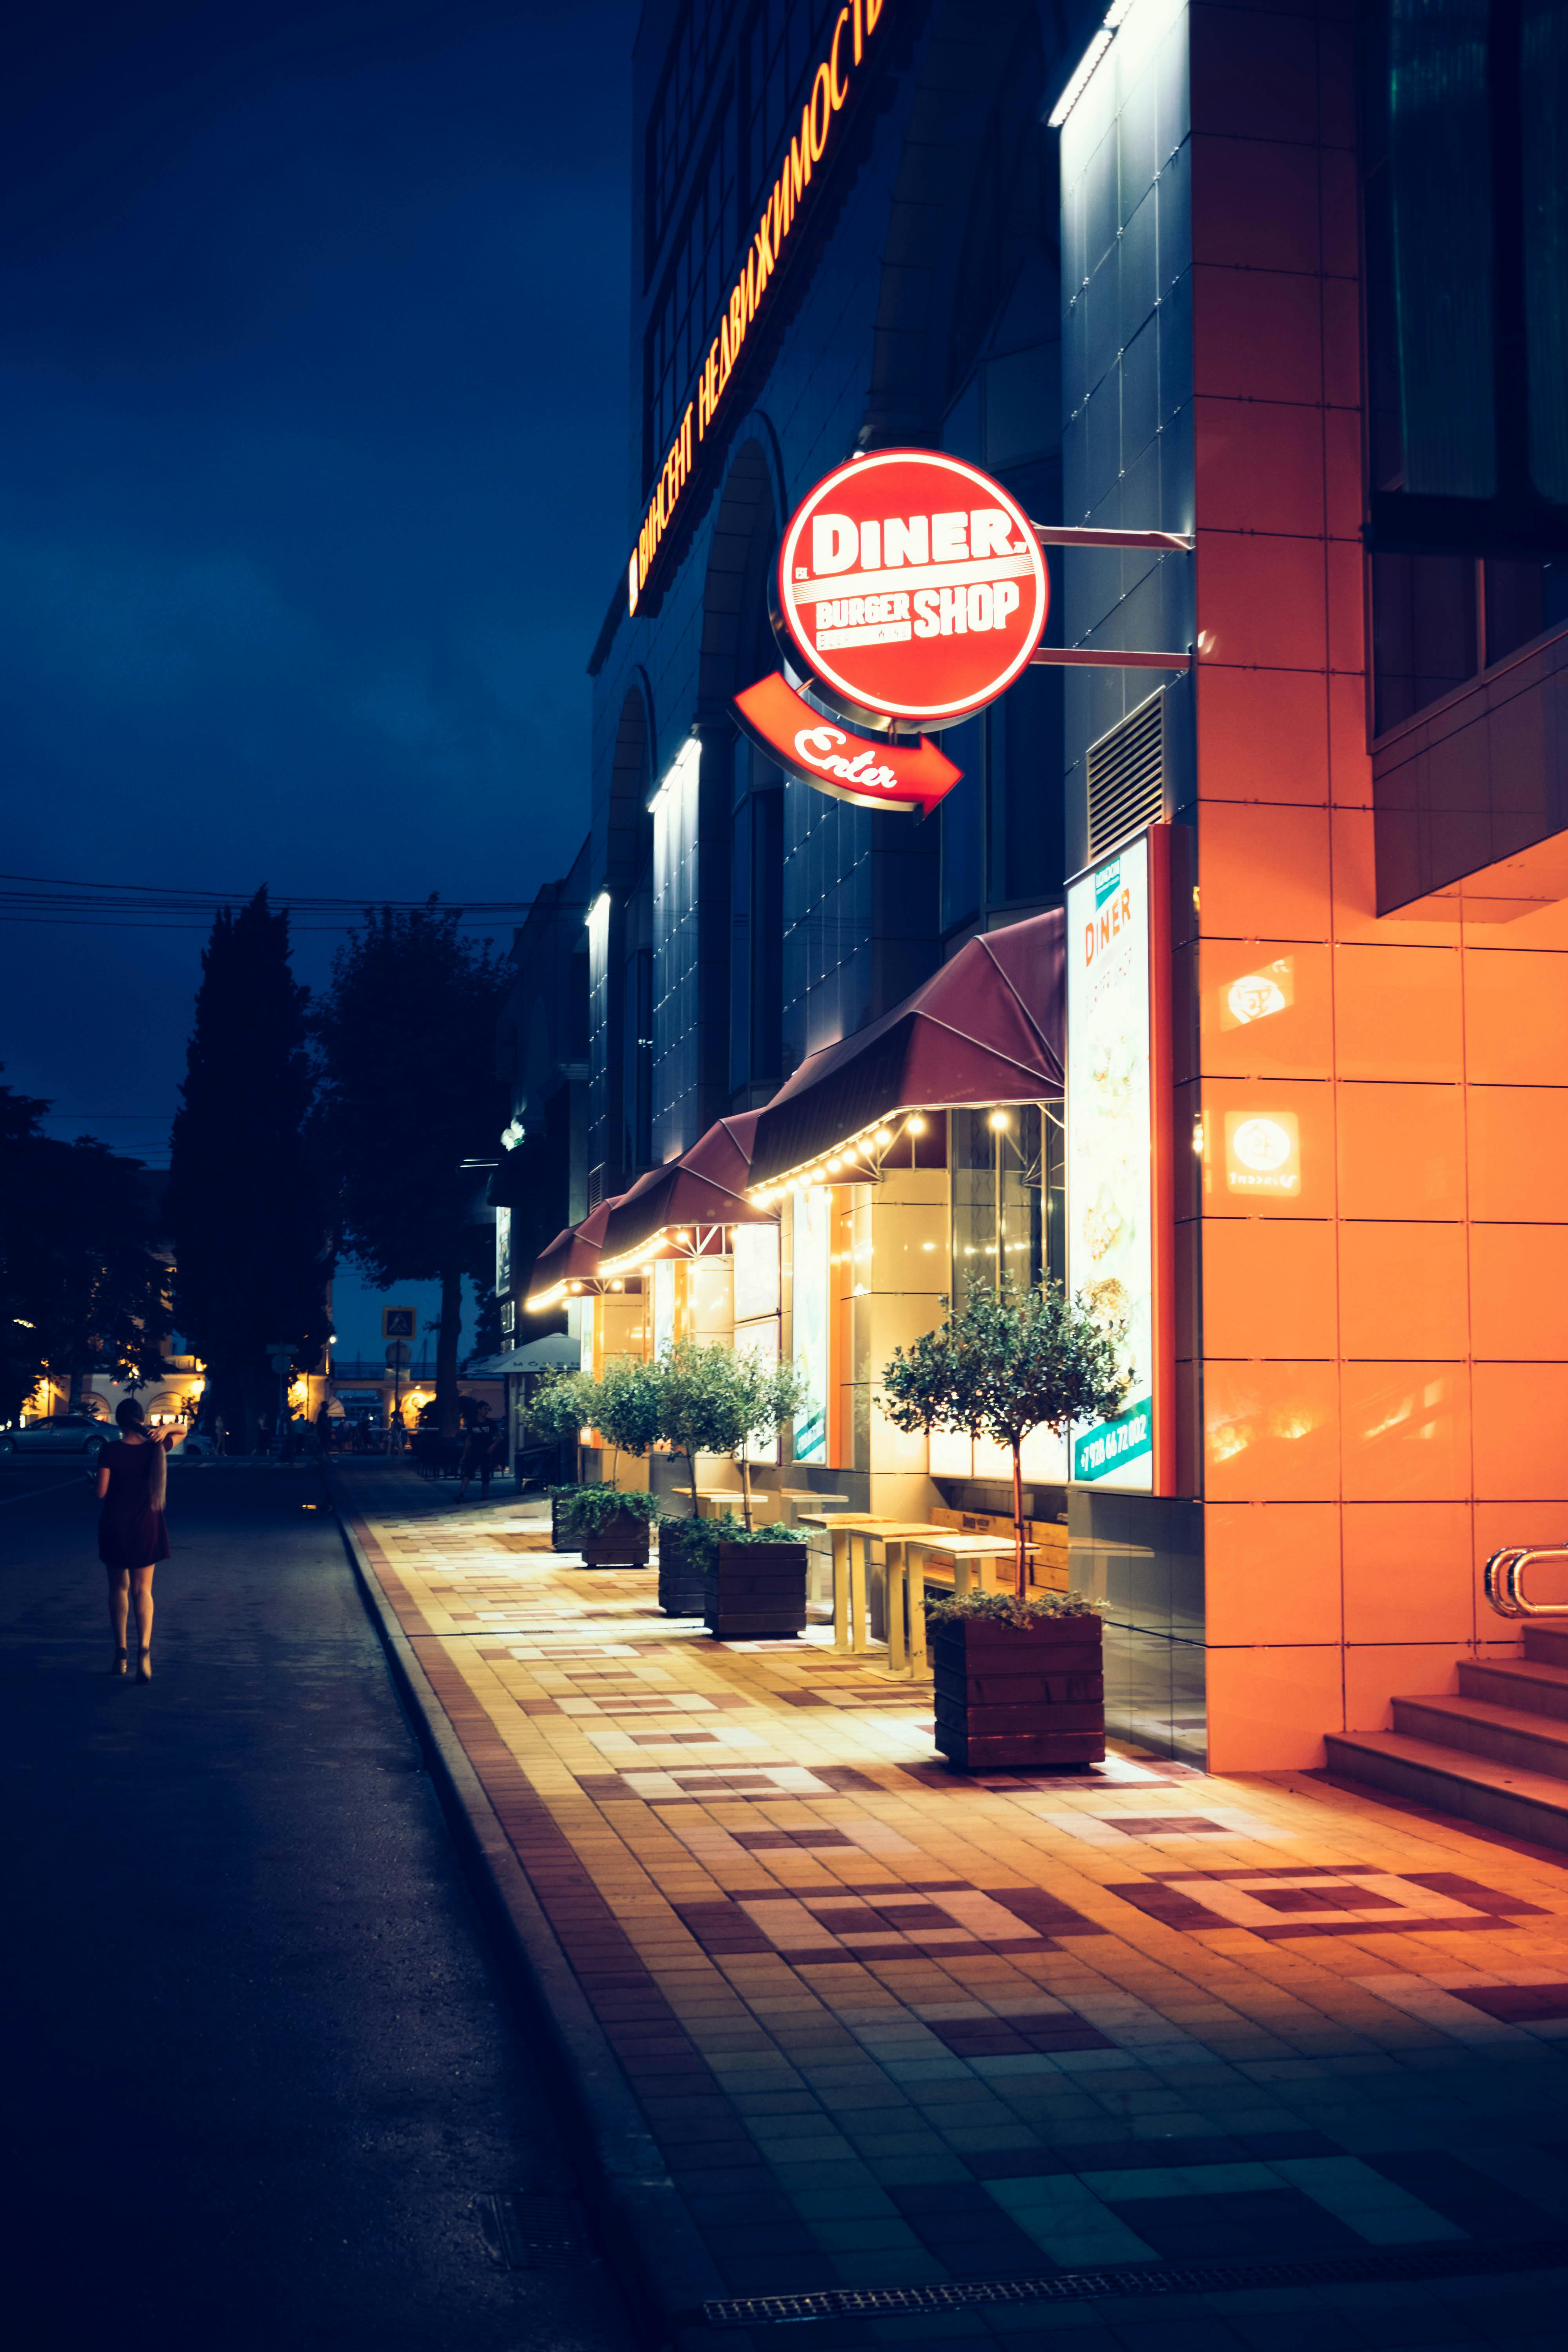 The exterior of a diner | Source: Pexels